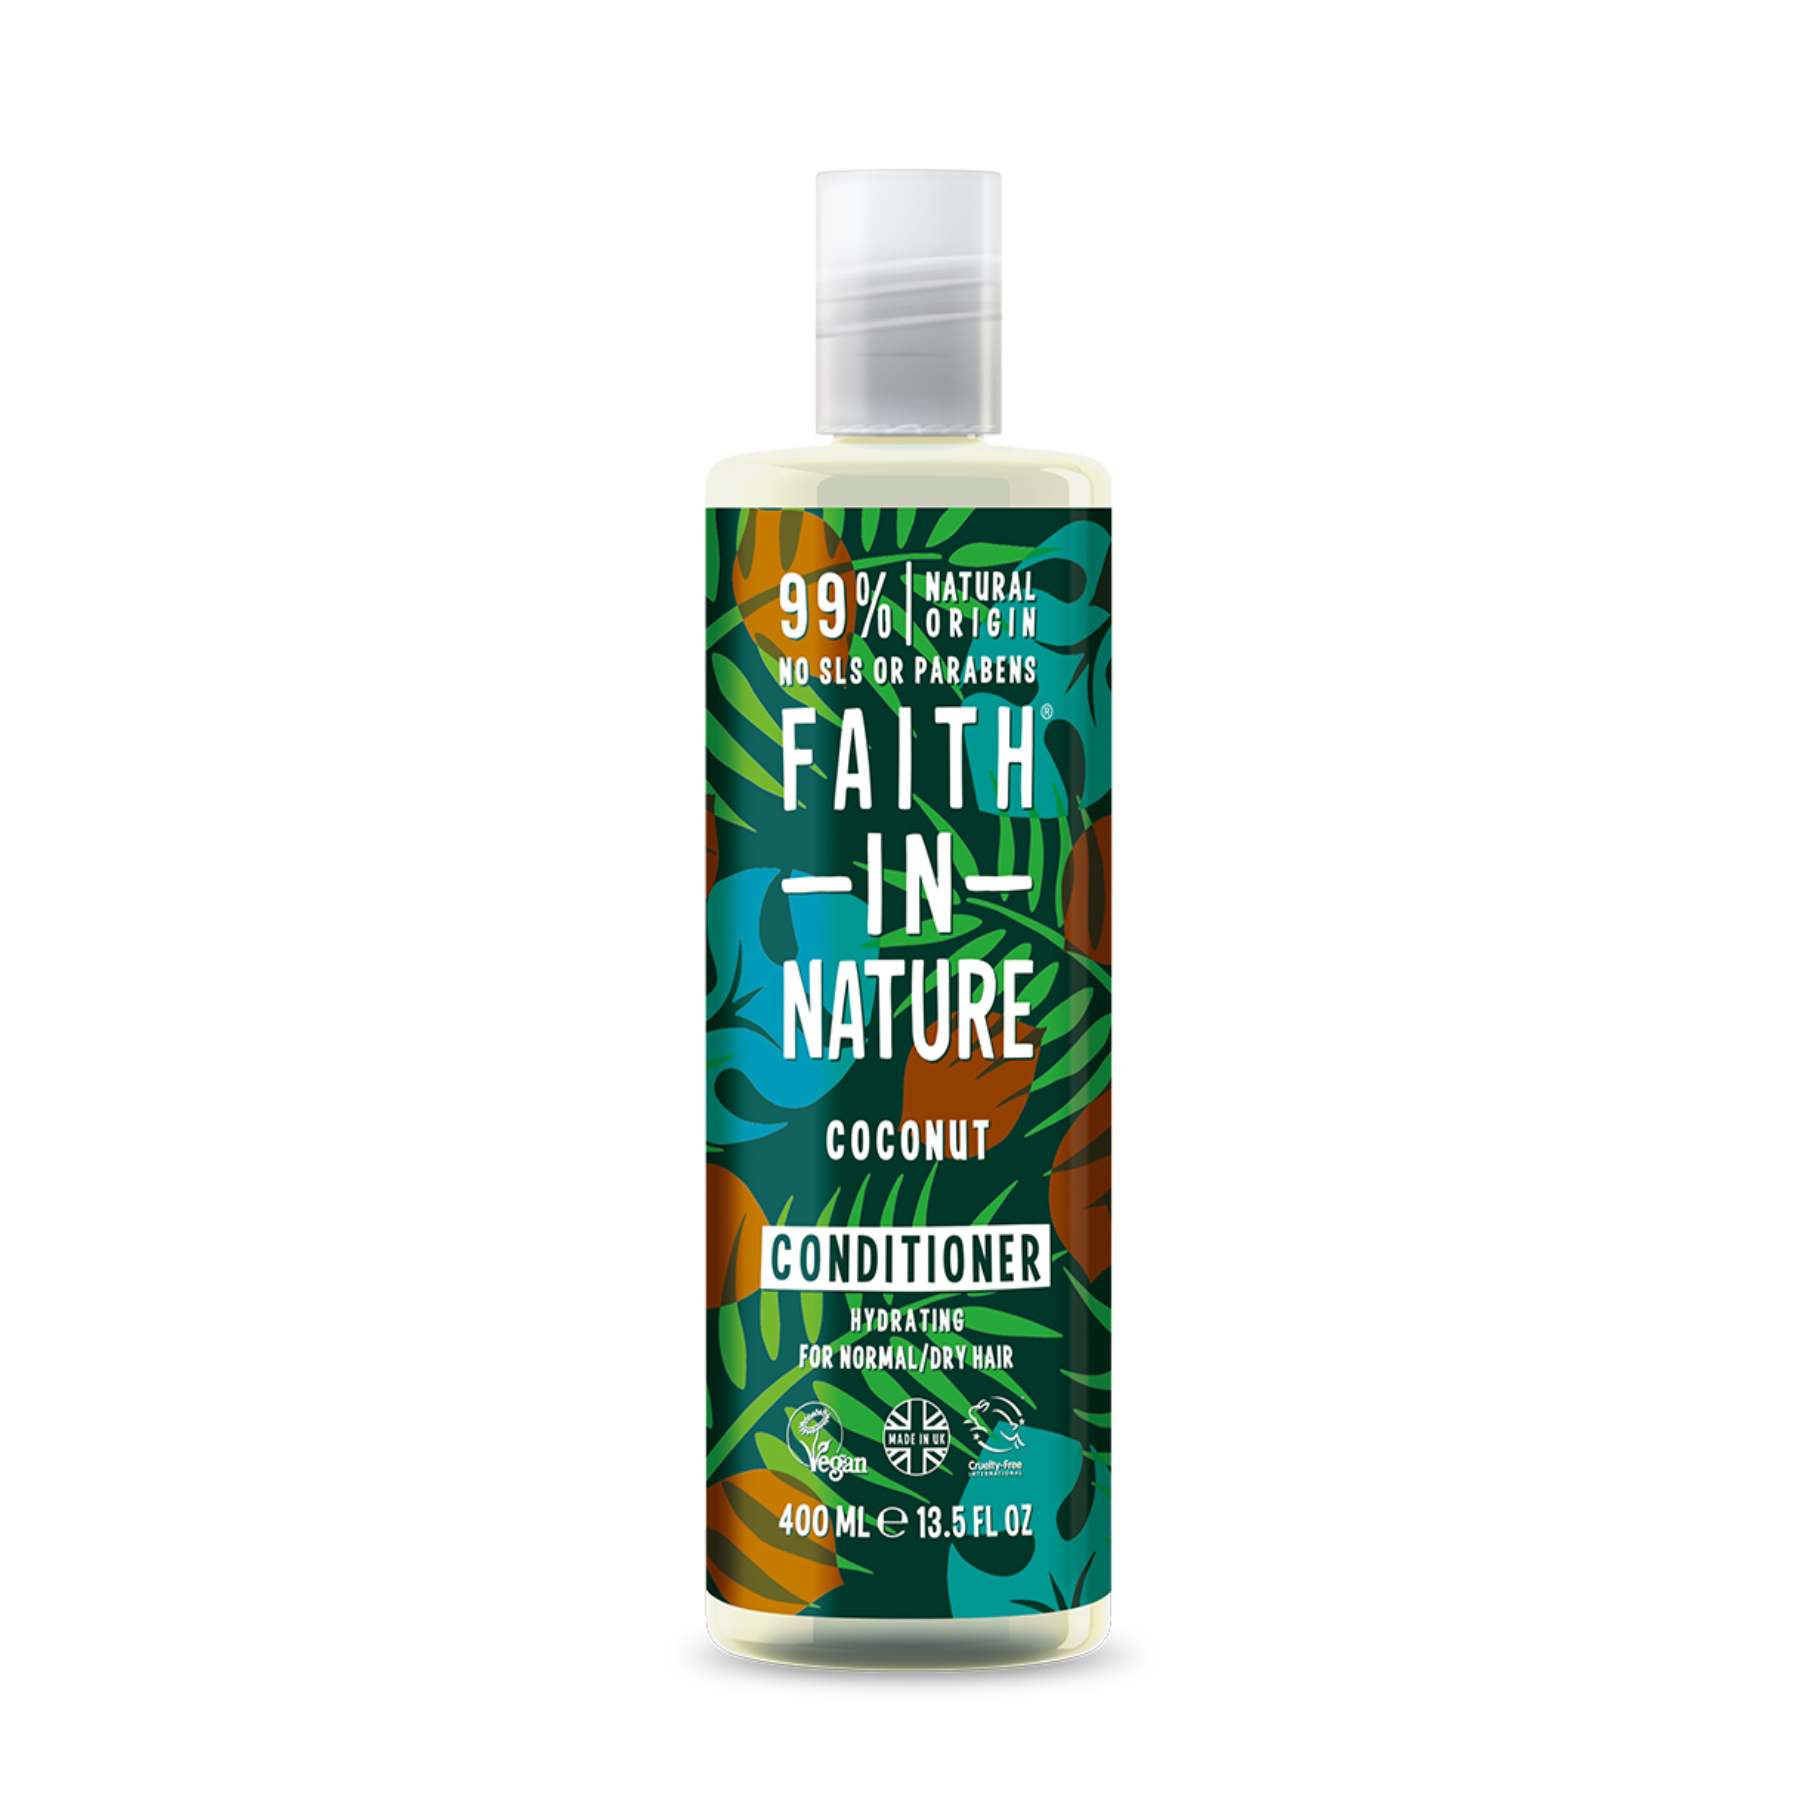  Shop Faith In Nature Shampoo Coconut Conditioner 400 ml | Hair Damage on Sublime Life. Restore hair damage with the goodness of Coconut